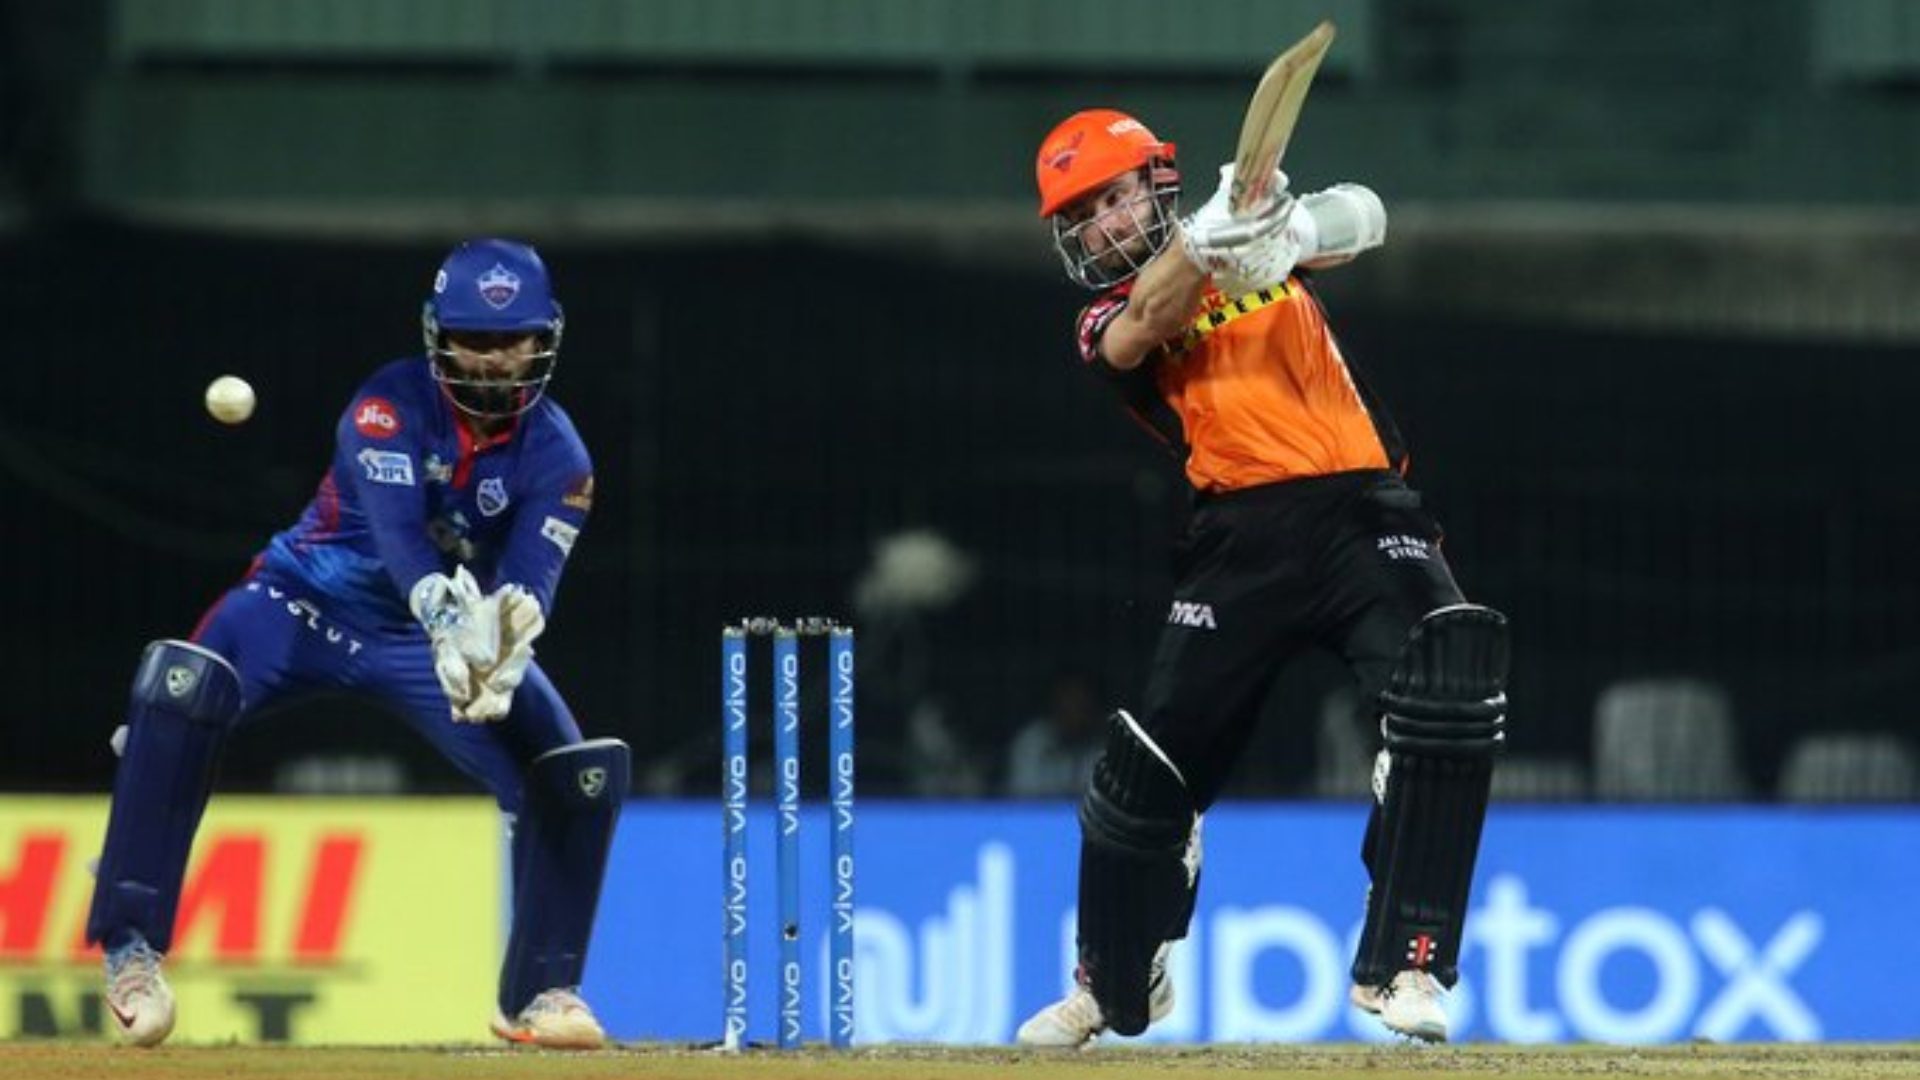 Sunrisers Hyderabad were once again on the receiving end of a Super Over loss in IPL 2021.